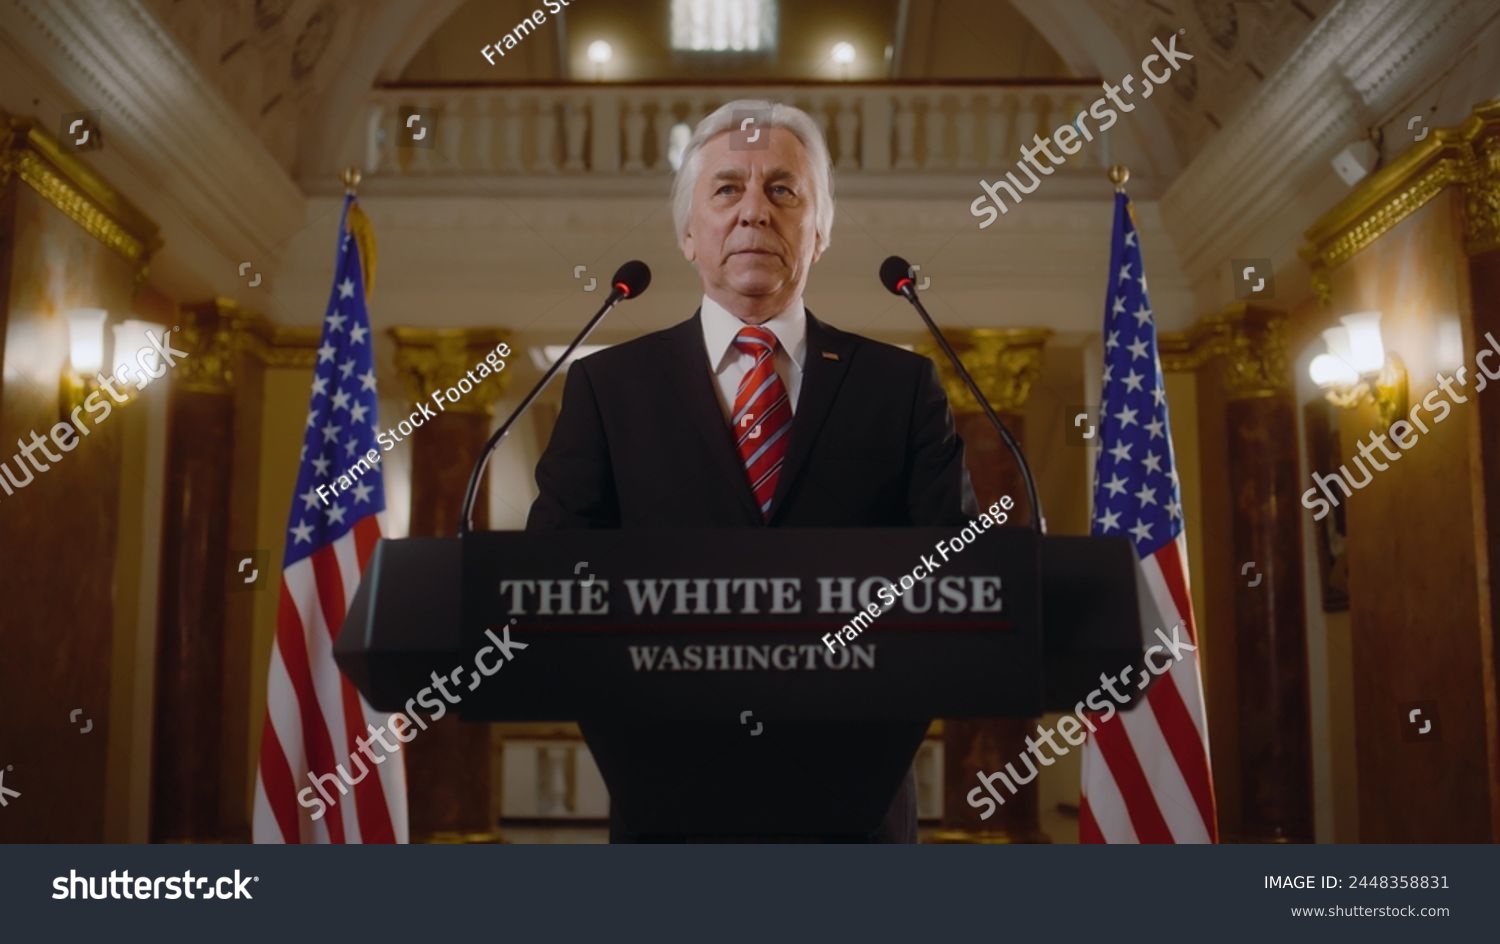 Senior republican politician answers press questions and gives interview for TV breaking news in White House. Confident political speech during press conference. Campaign speech. Political discourse. #2448358831